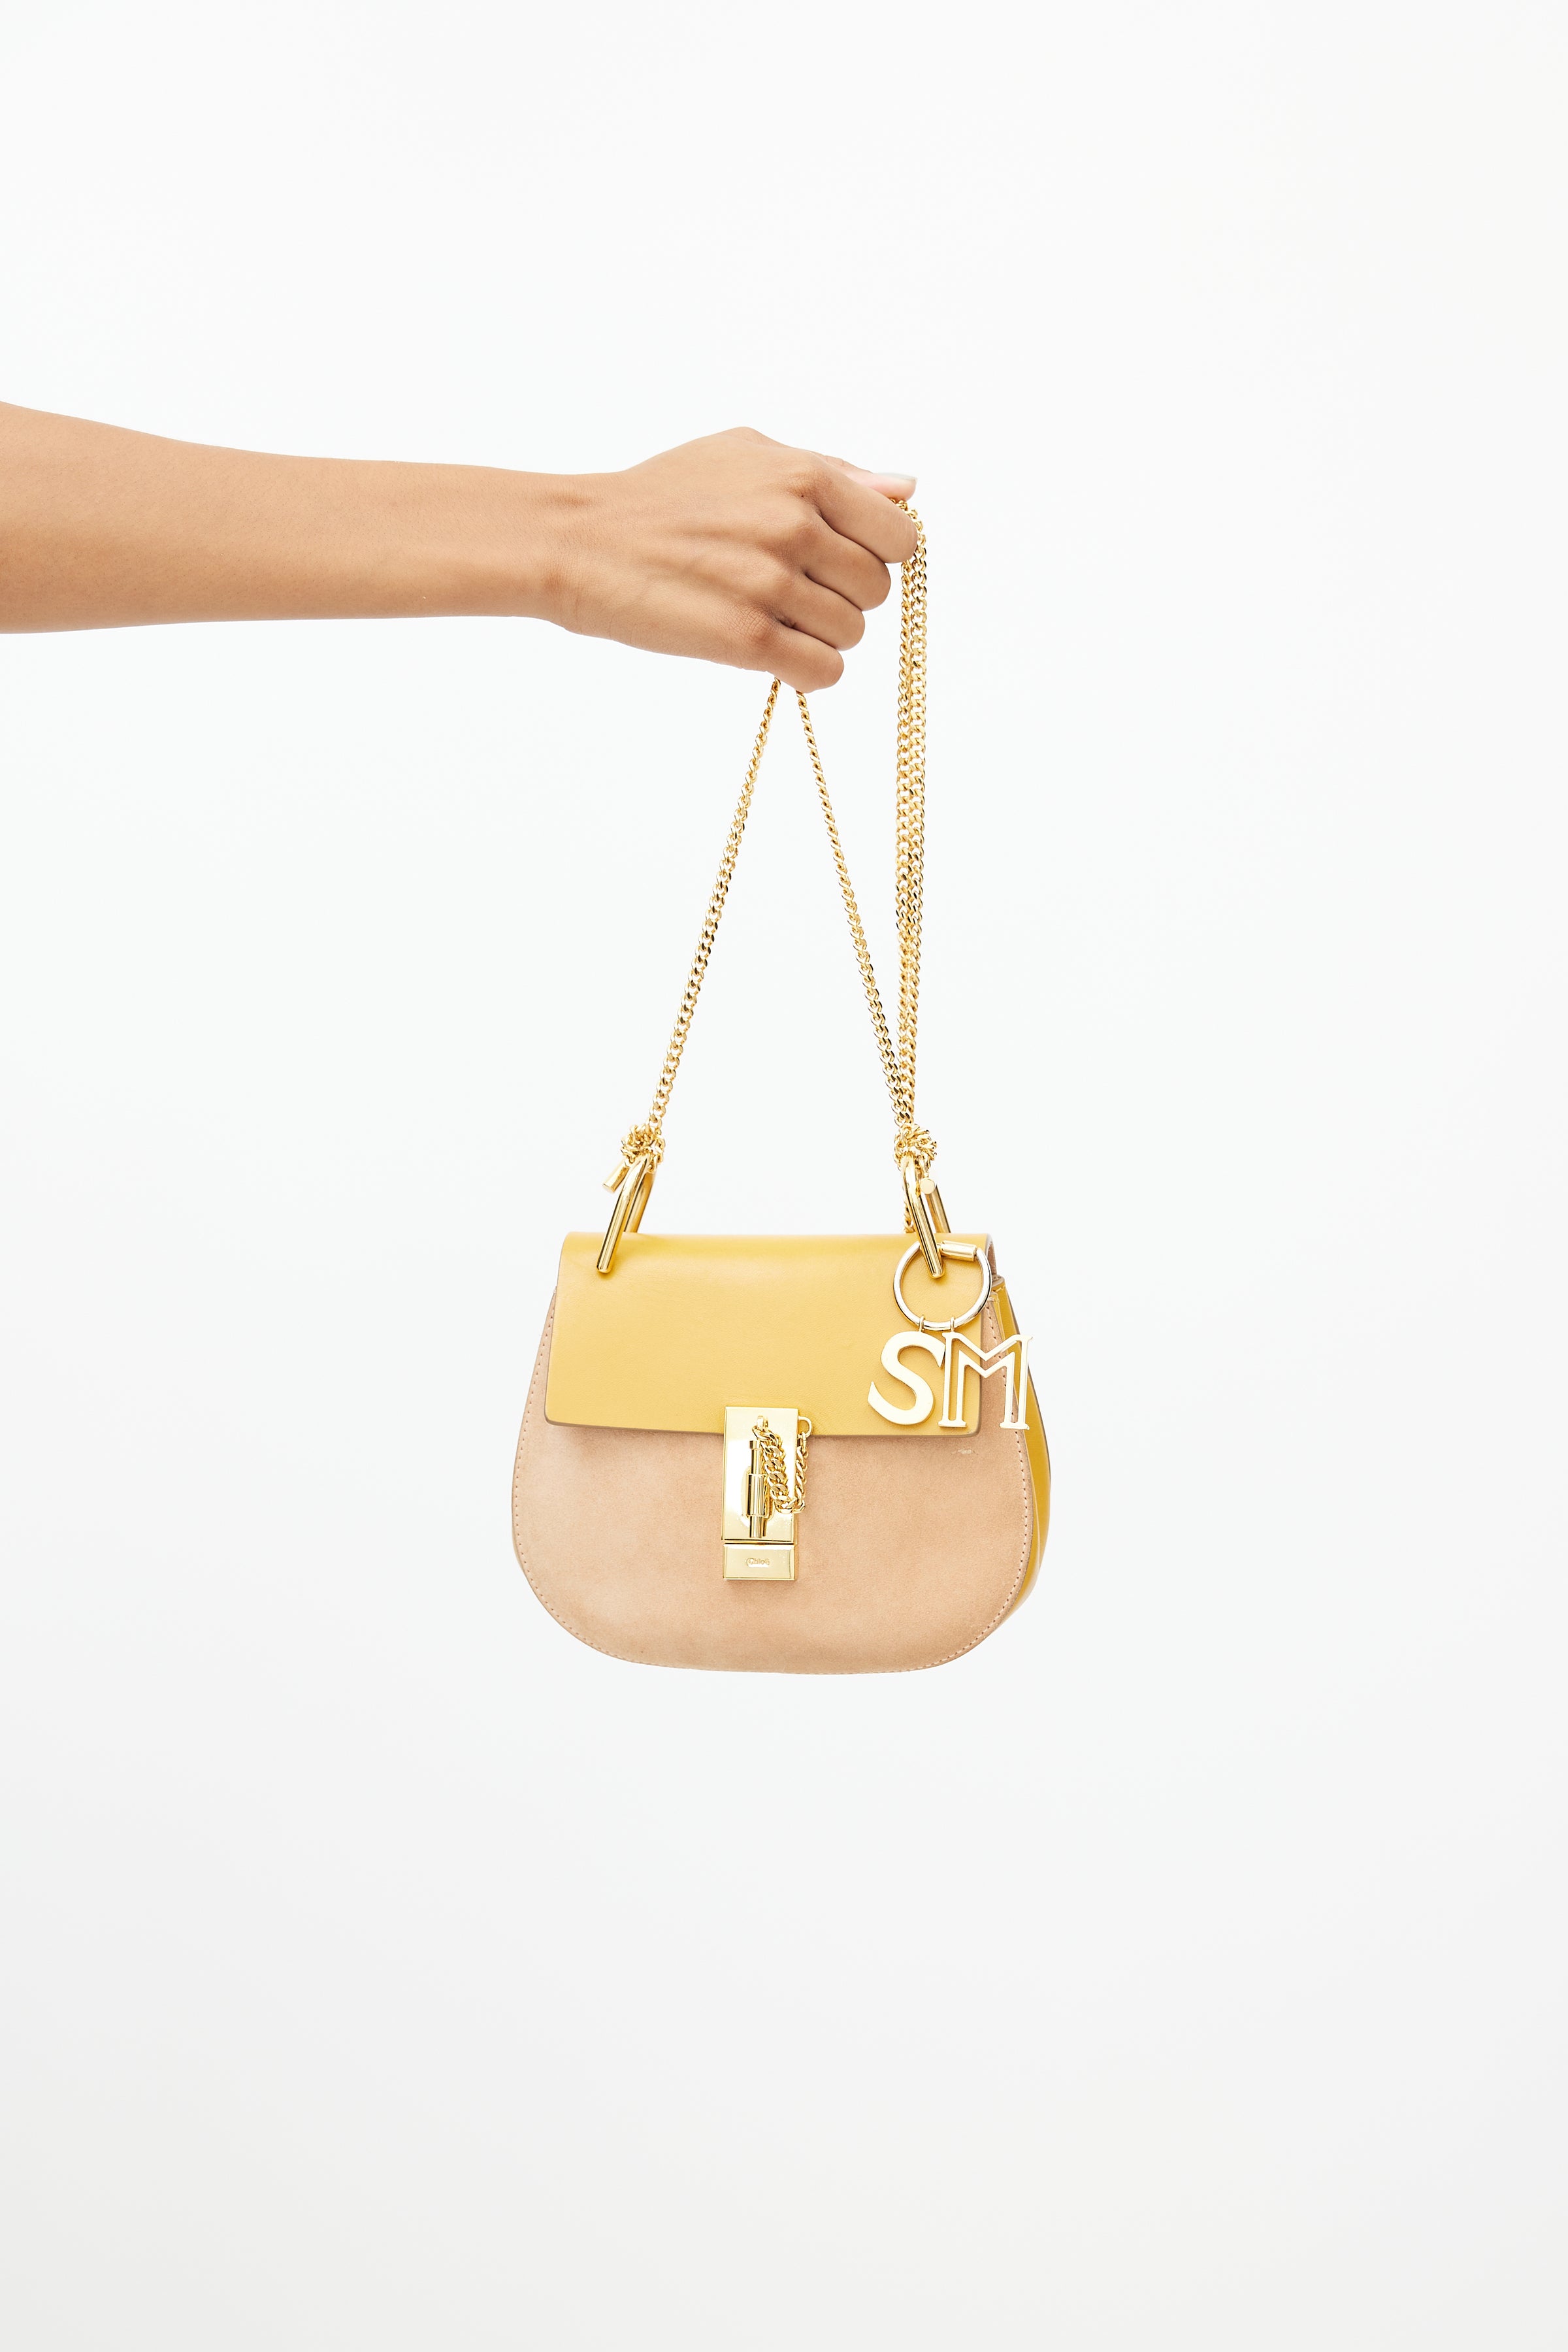 Is the Chloé Drew Being Discontinued? - PurseBlog